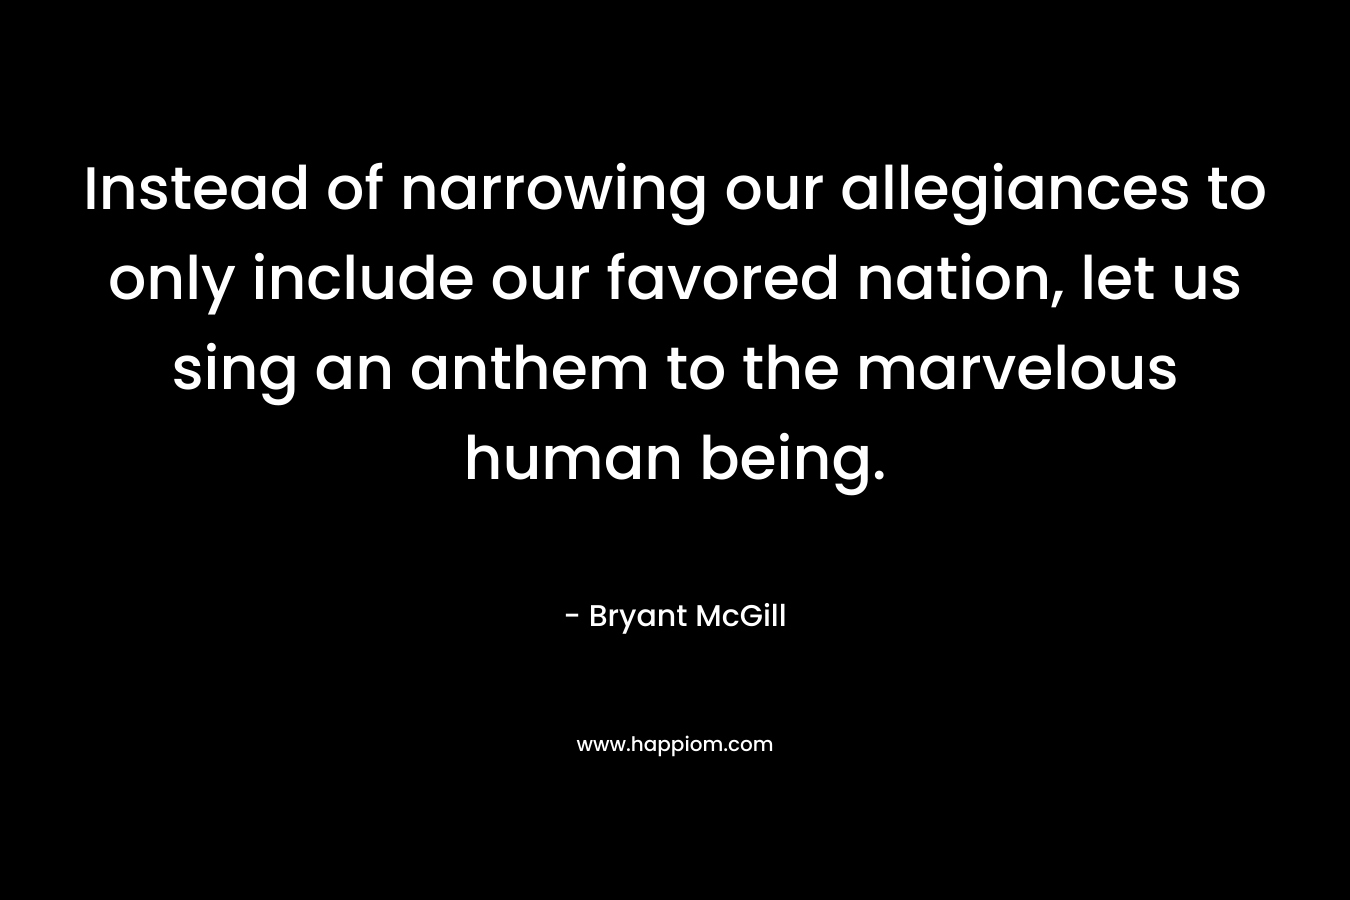 Instead of narrowing our allegiances to only include our favored nation, let us sing an anthem to the marvelous human being. – Bryant McGill